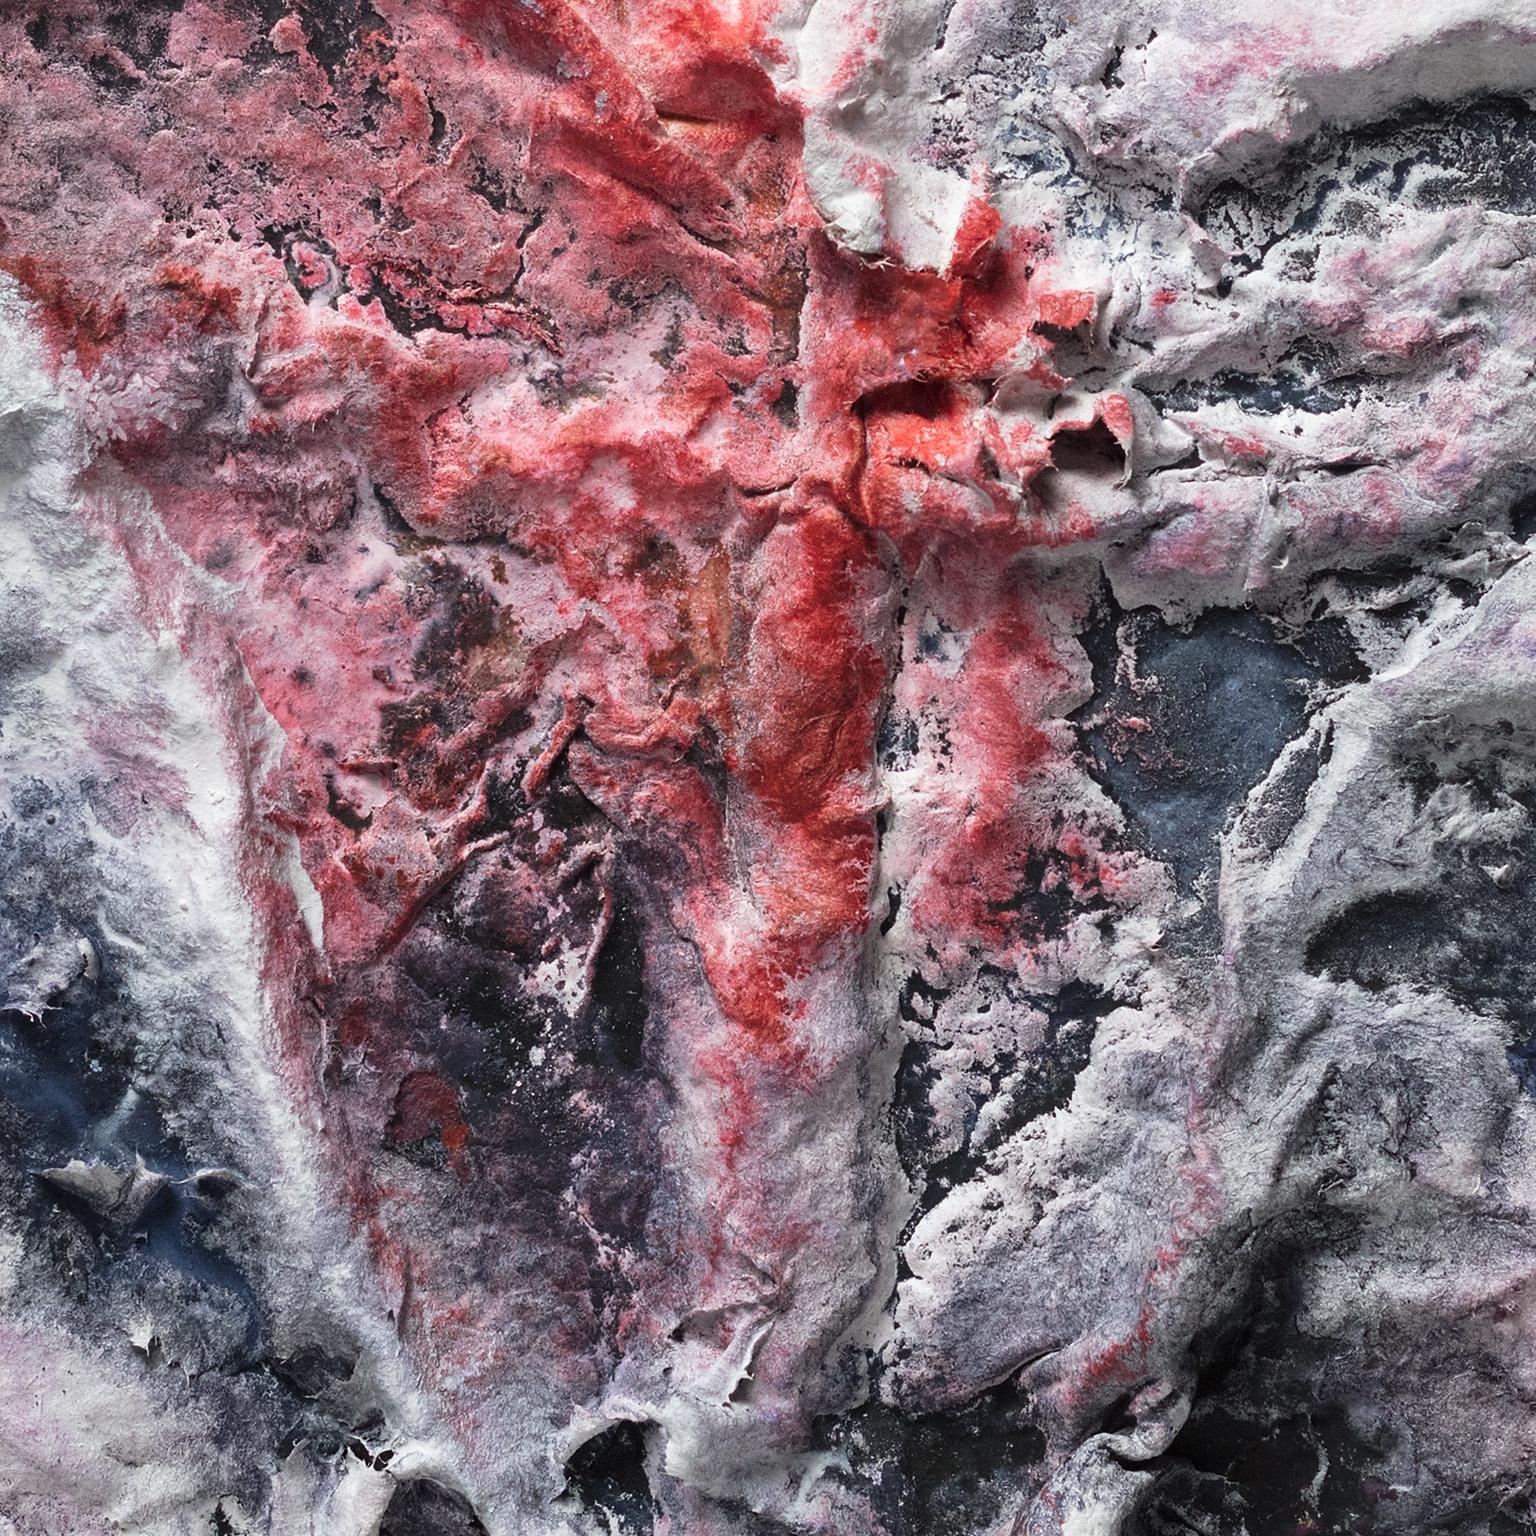 Ardere Nix (Burning Snow) - Small abstract red and black work on paper - Art by Ruggero Vanni